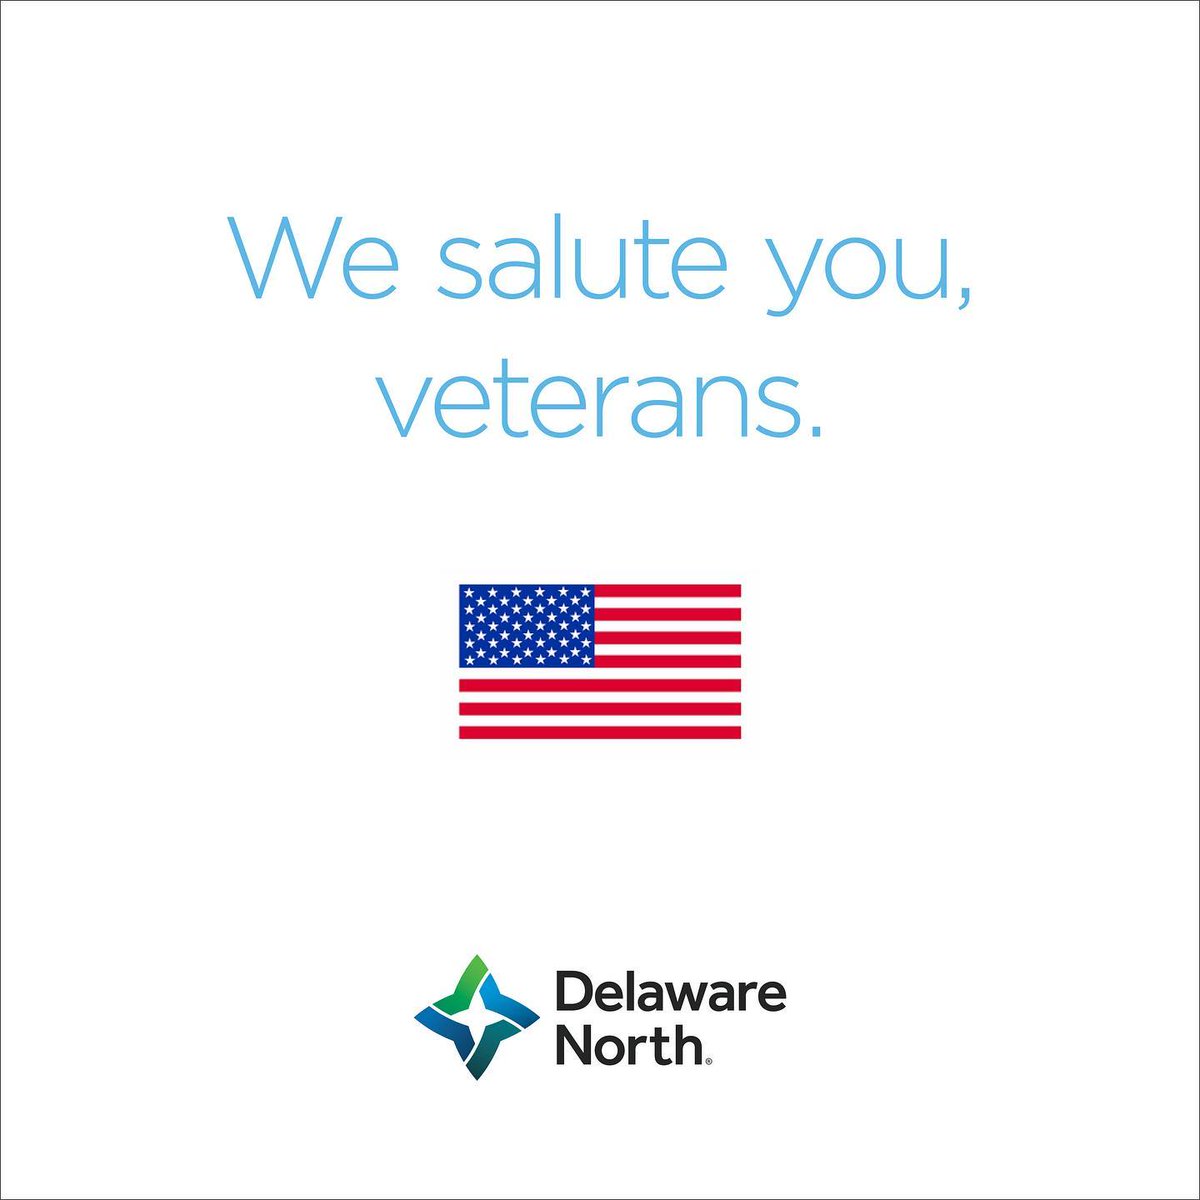 Today, and every day, we honor our veterans and military families and are grateful for their service and sacrifice. Veterans have proven themselves in situations that demand teamwork, commitment and integrity, and Delaware North is proud to be a veteran-friendly employer.